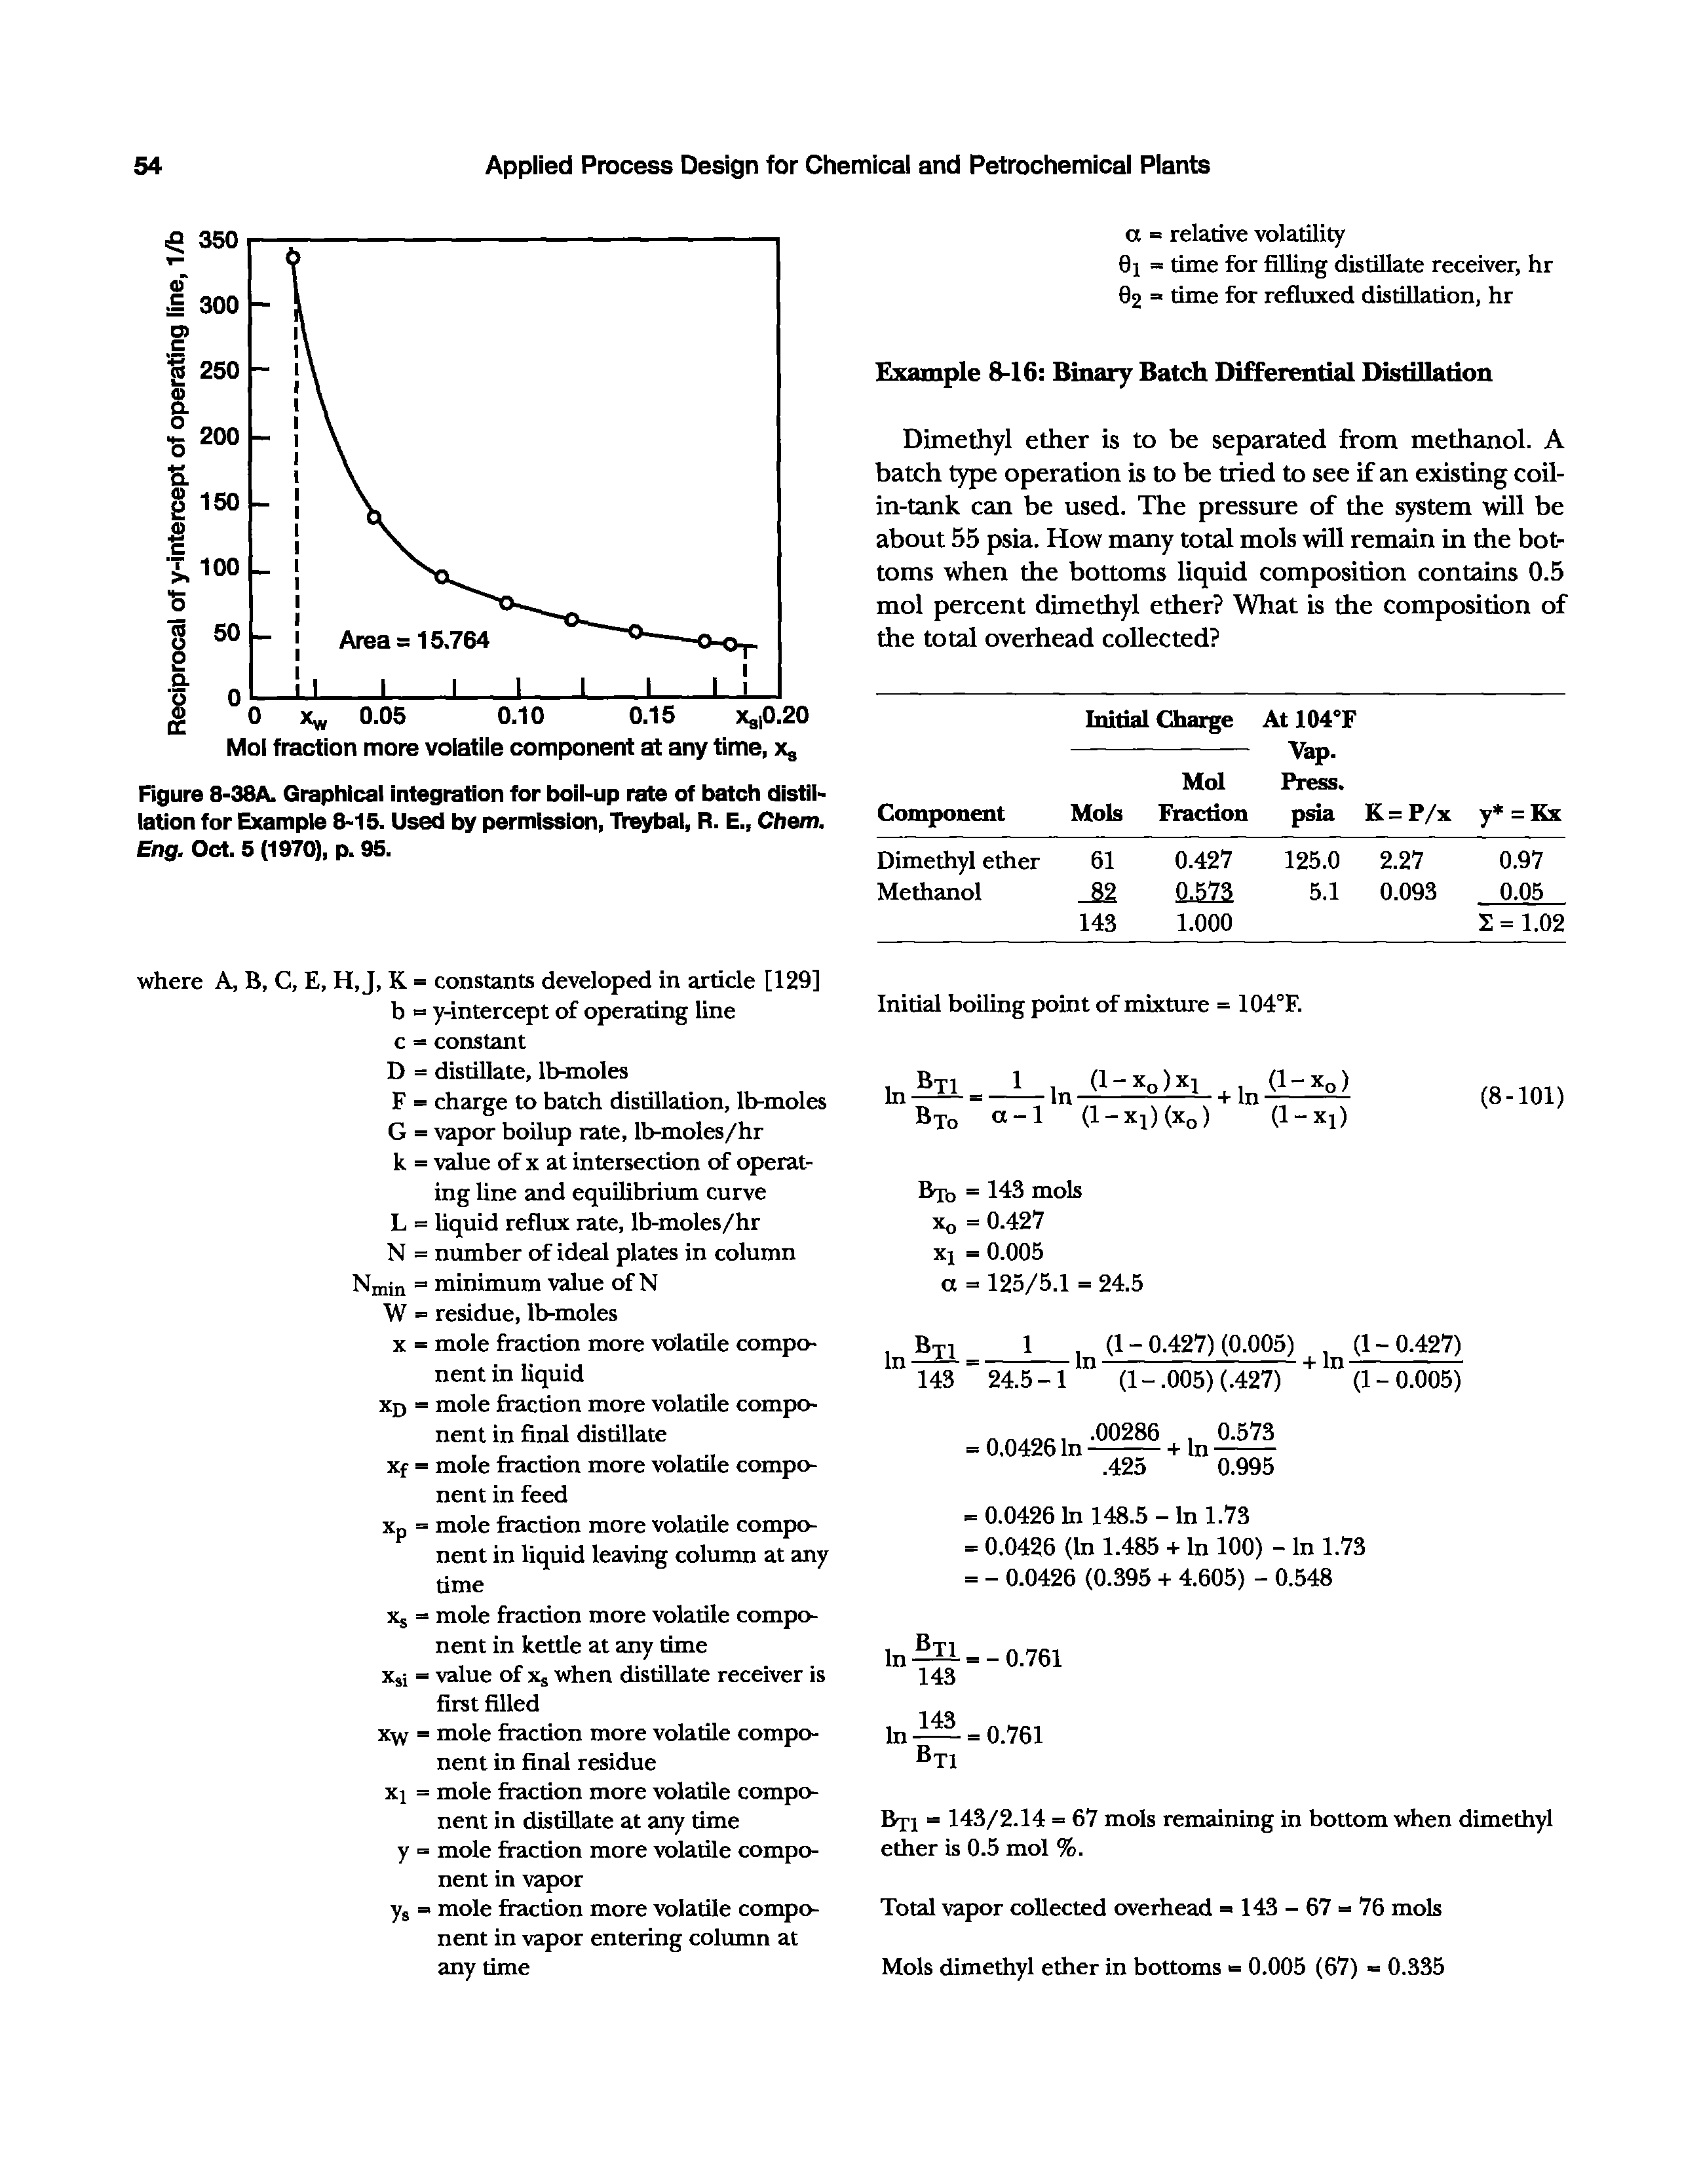 Figure 8-38A. Graphical integration for boil-up rate of batch distillation for Example 8-15. Used by permission, Treybal, R. E., Cftem. Eng. Oct. 5 (1970), p. 95.